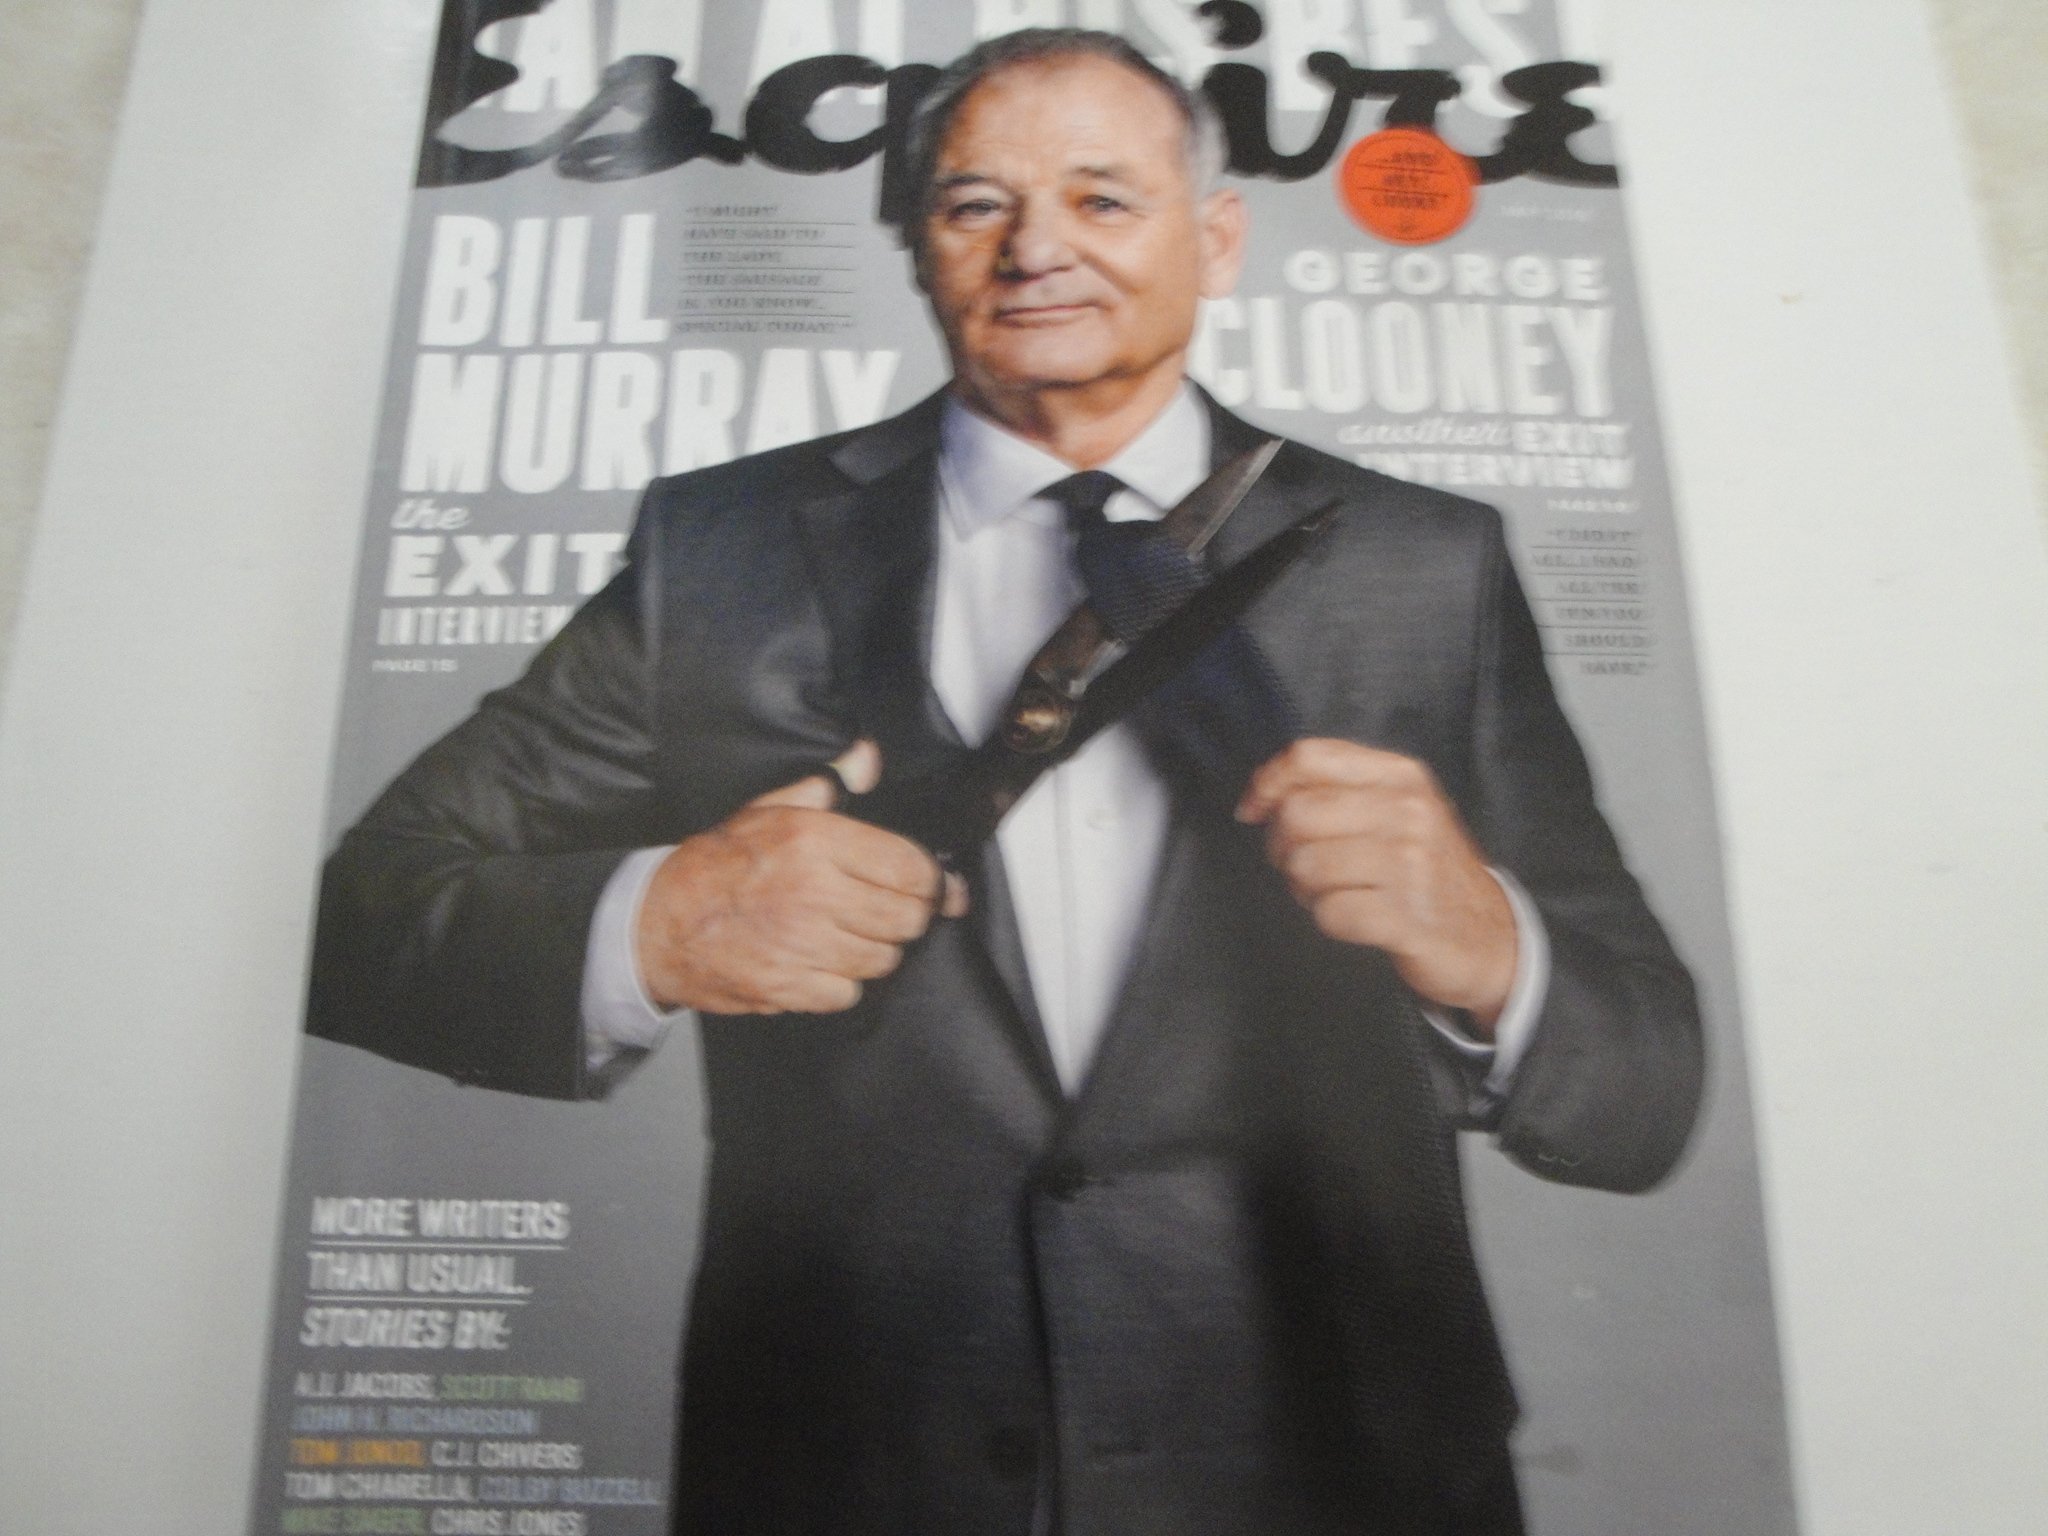 Esquire Magazine May George Clooney Cover Staff Amazon